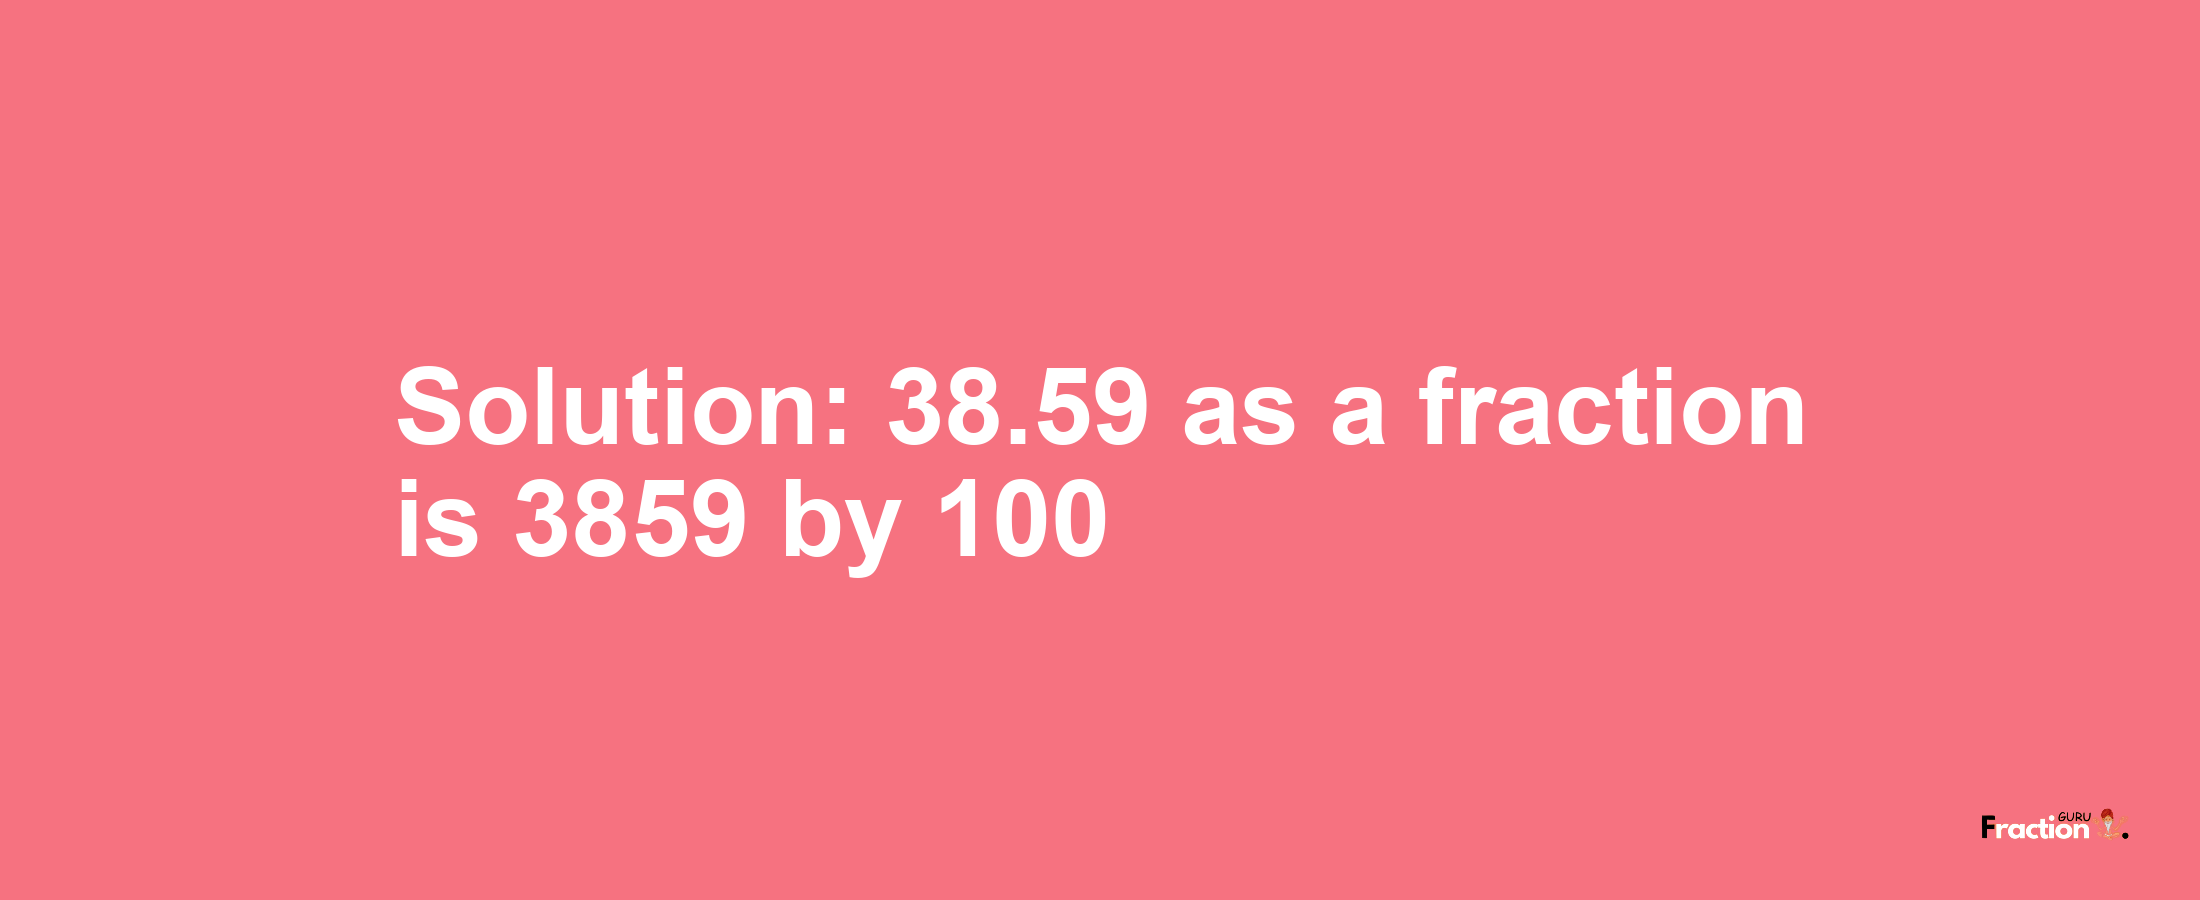 Solution:38.59 as a fraction is 3859/100